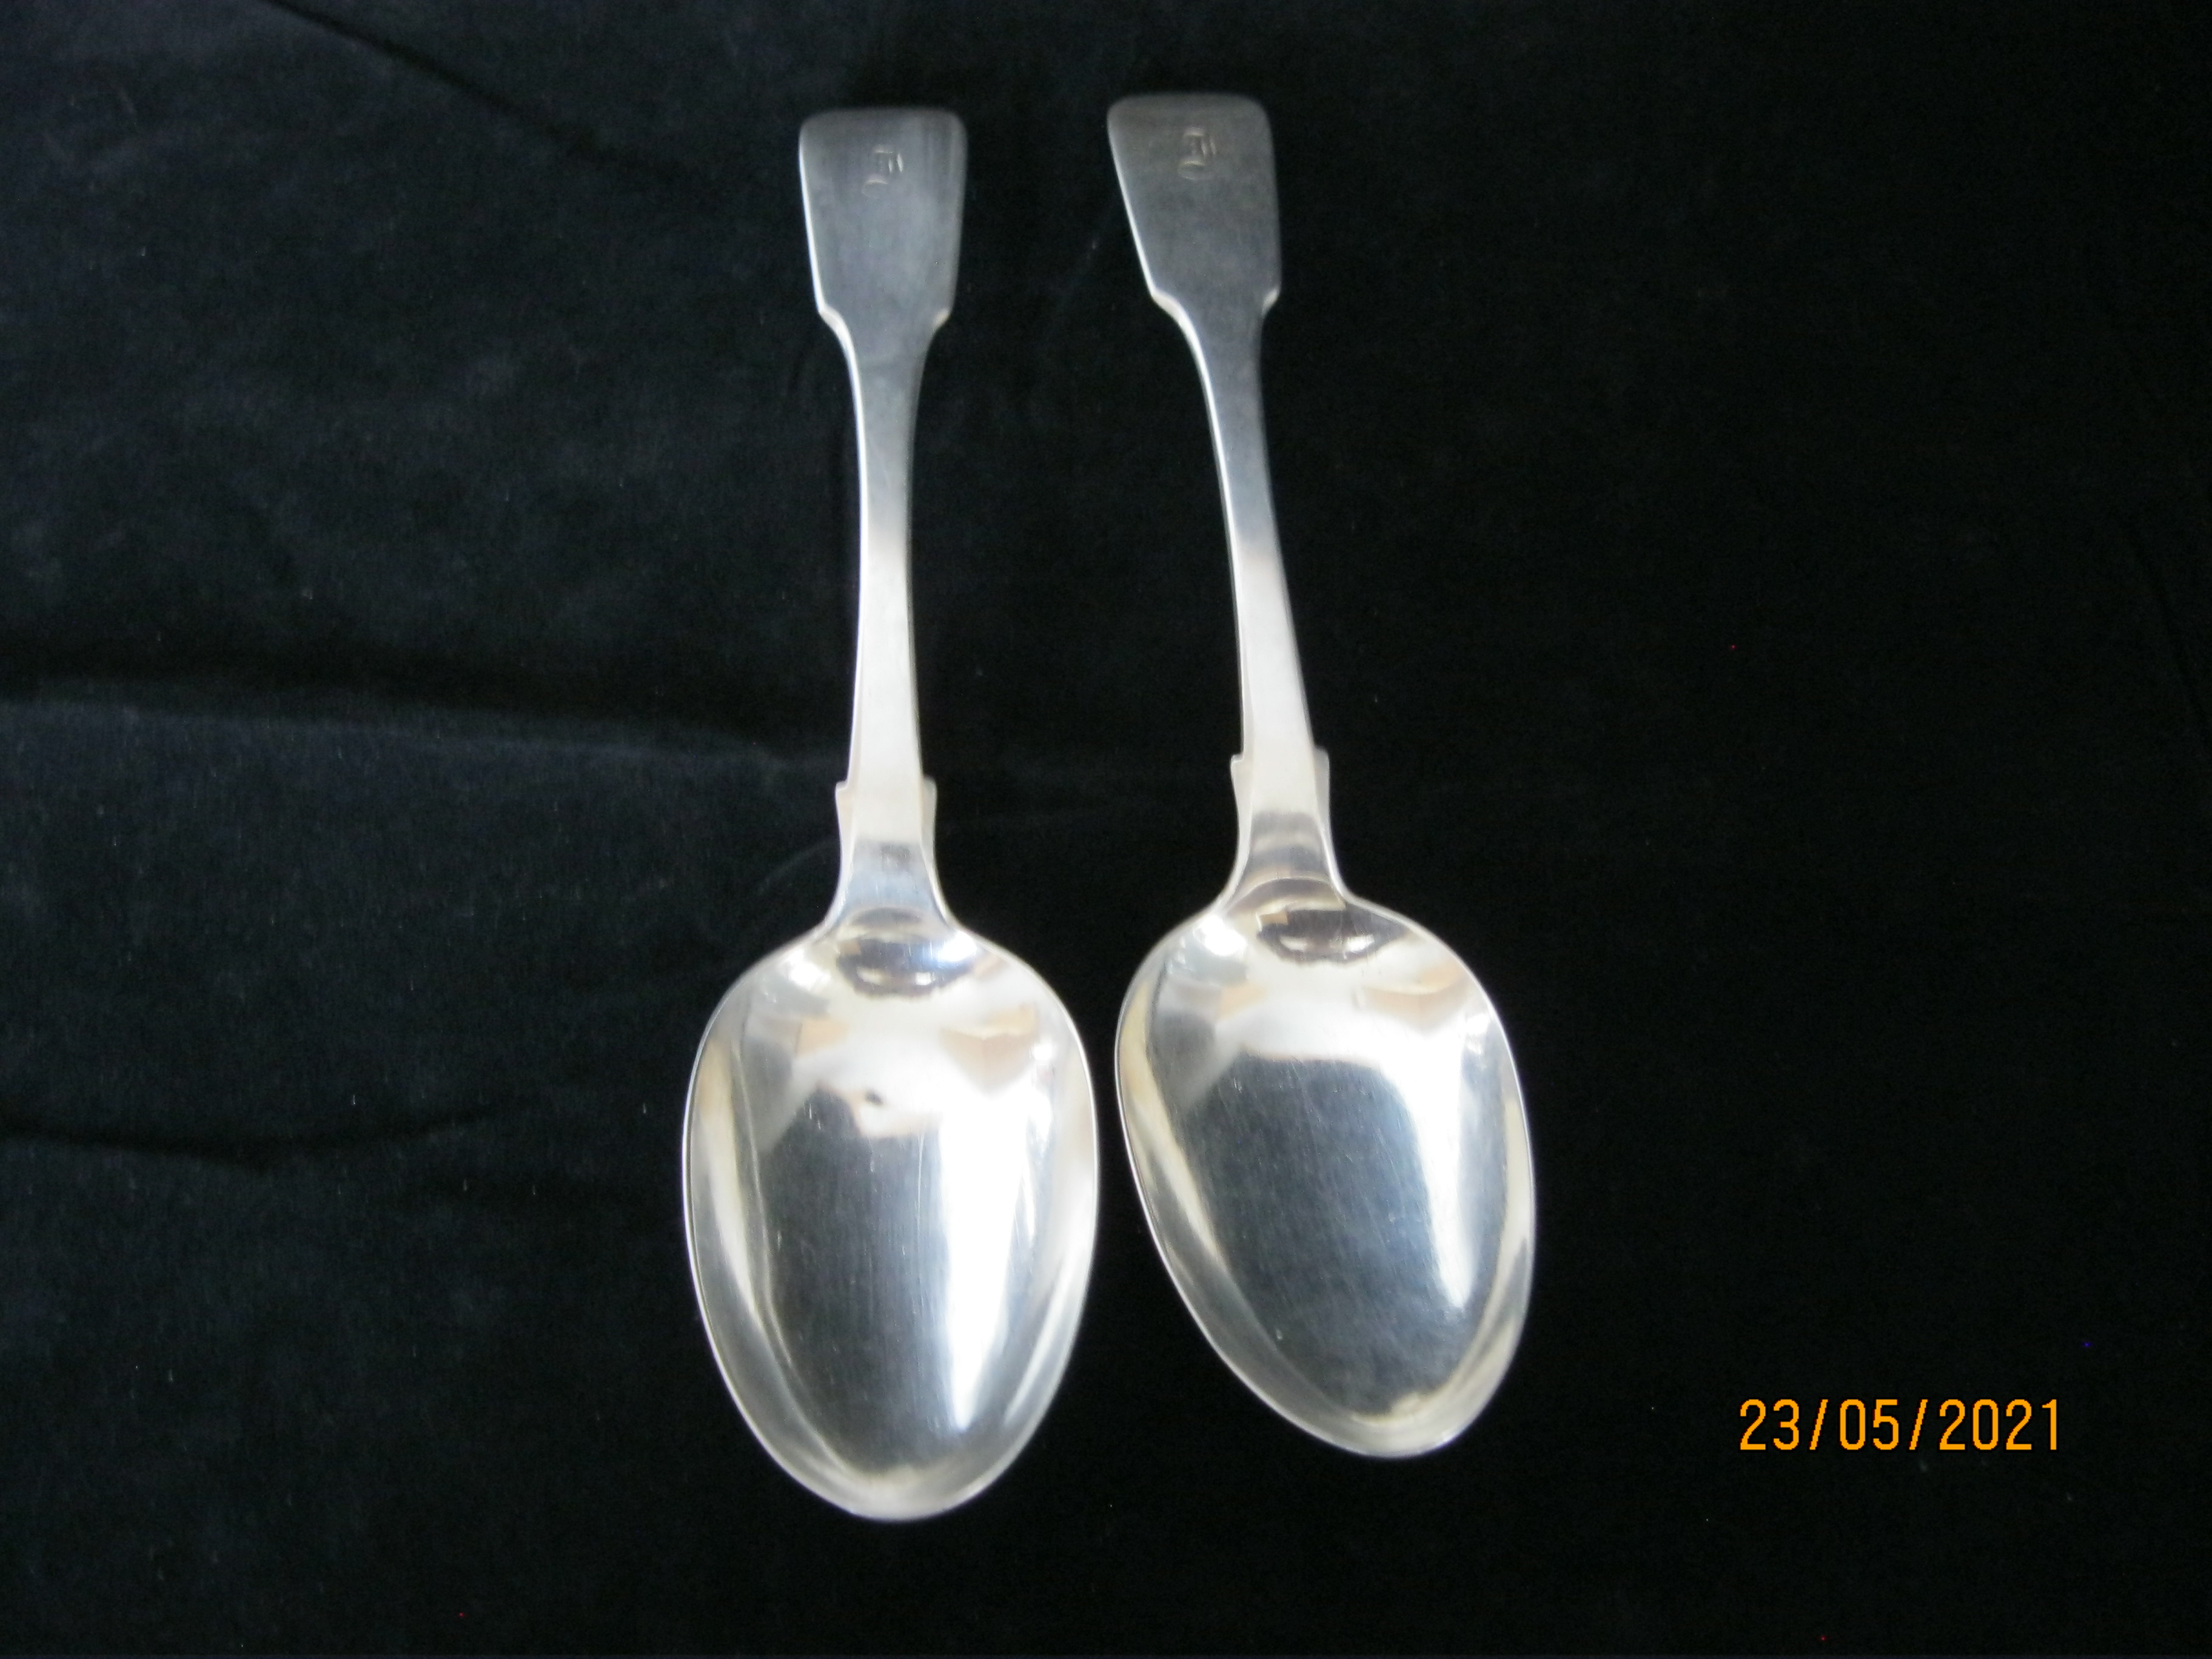 Matching Pair Antique Victorian Table / Serving Spoons 1850 Edinburgh - Image 7 of 7